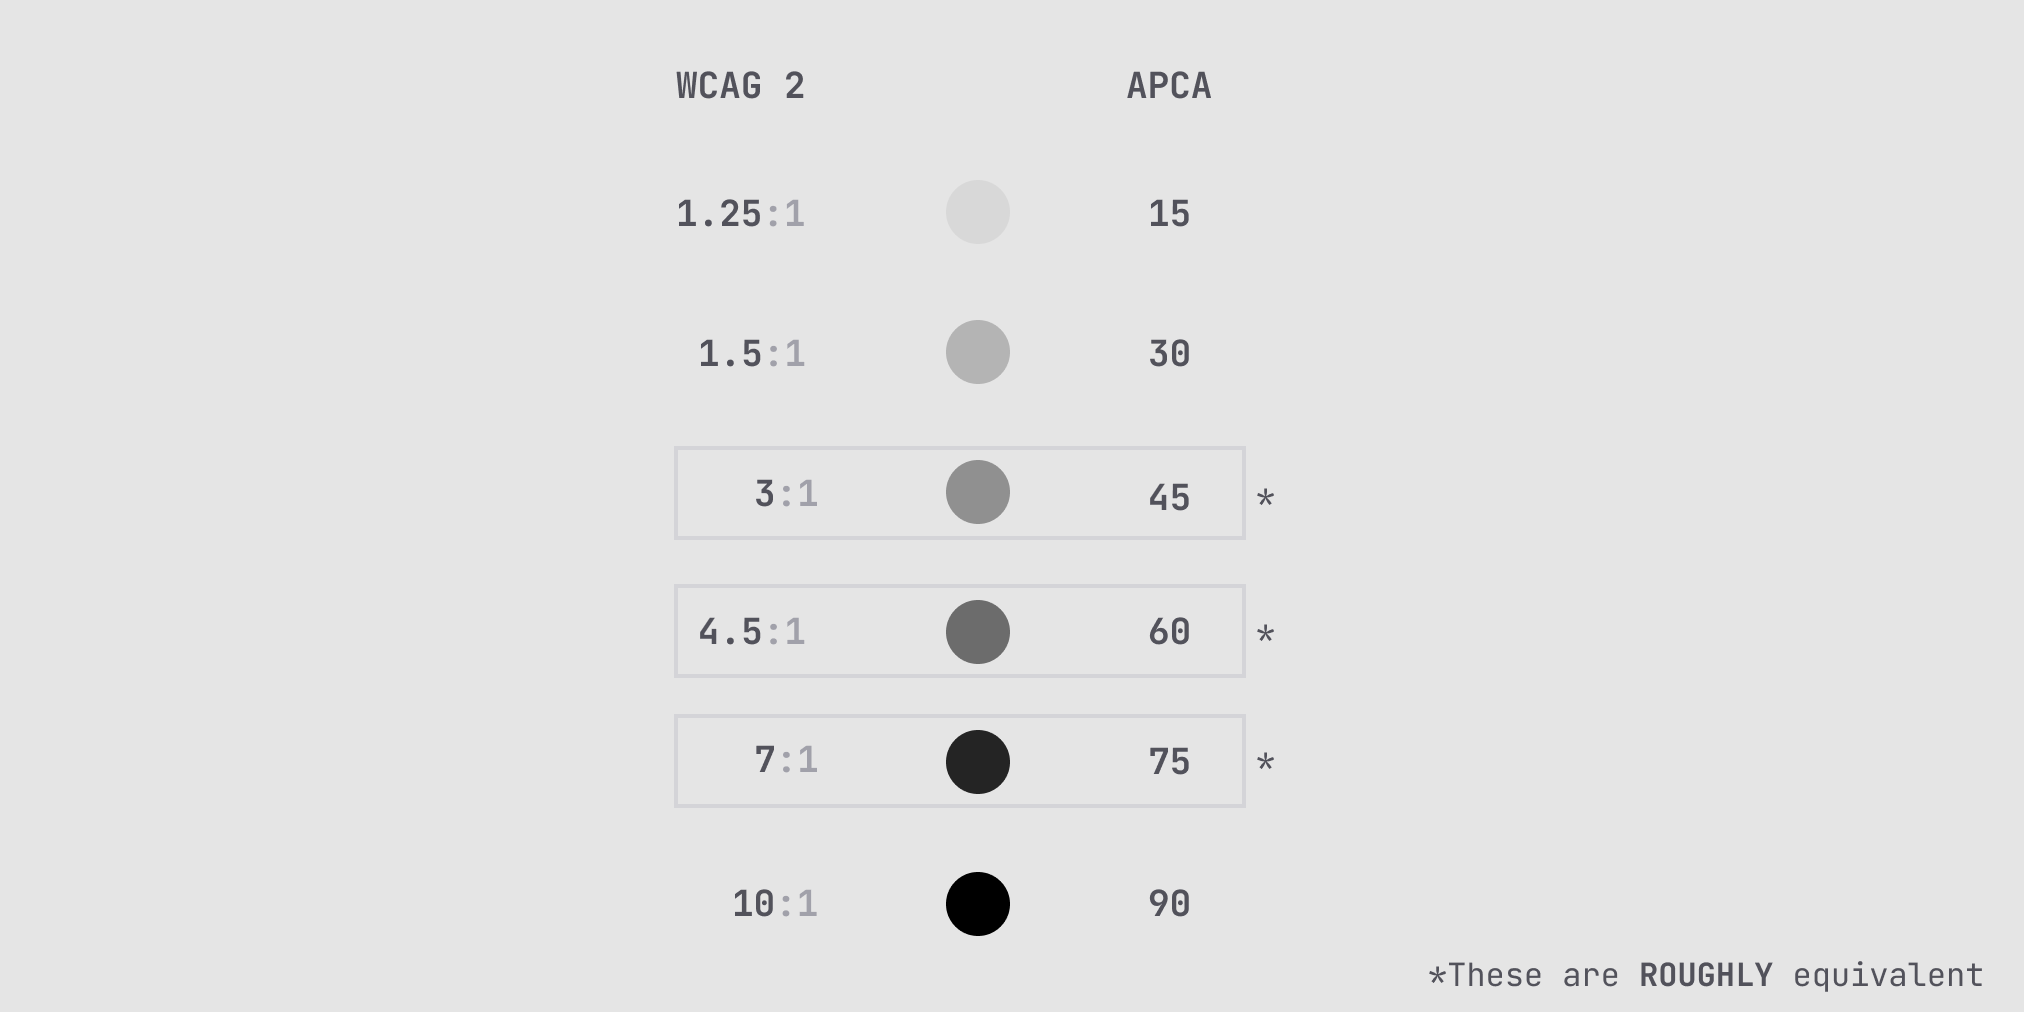 A table describing how the WCAG 2 contrast ratios roughly equate to the new APCA levels.